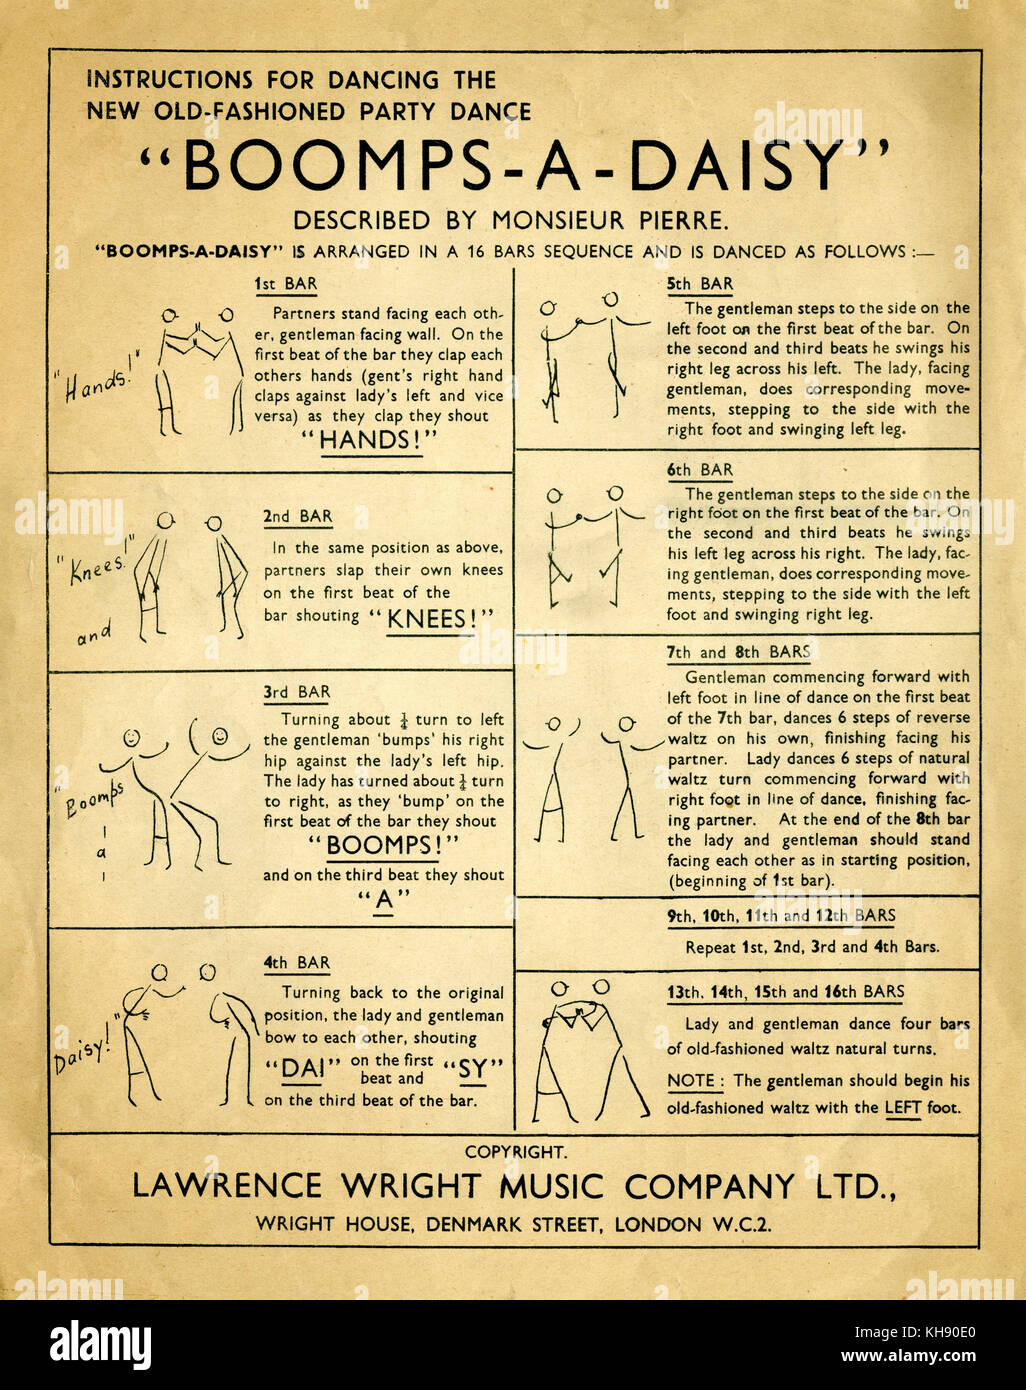 Instructions for dancing the Hands, Knees and Boomps-a-Daisy dance, described by Monsieur Pierre. Words and music by Annette Mills, Lawrence Wright Music Co, 1939. Stock Photo